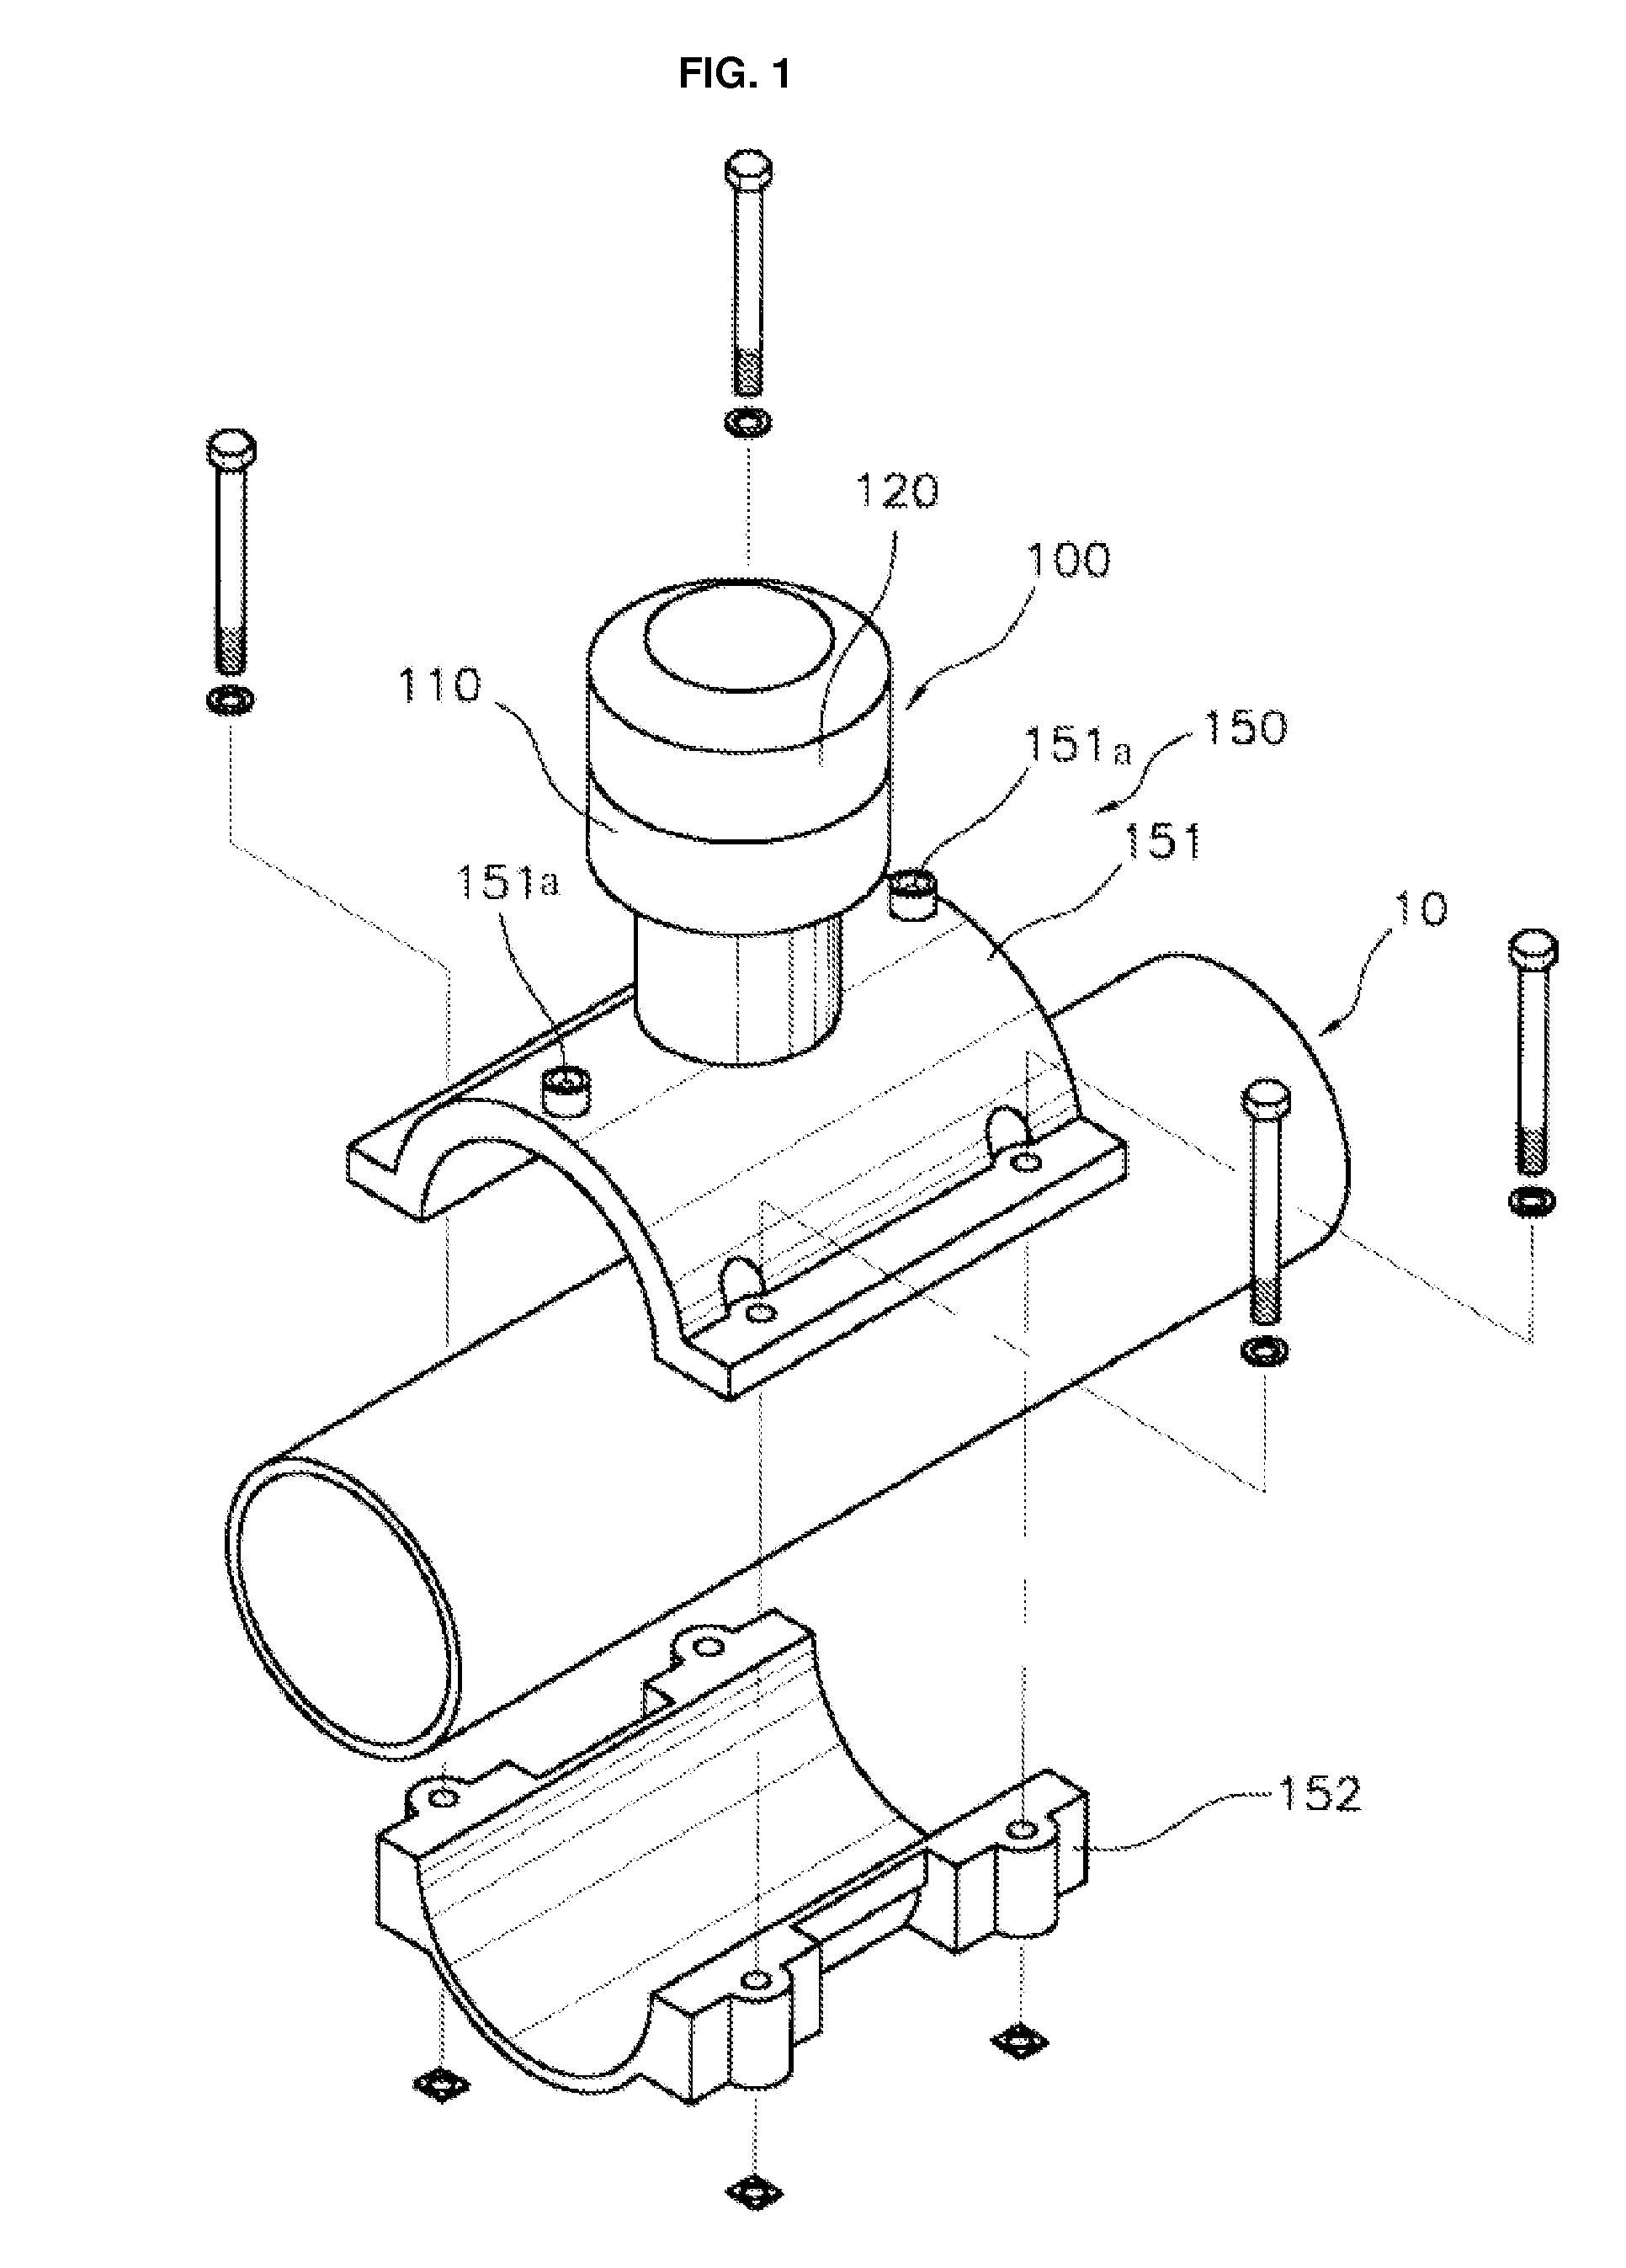 Branching Apparatus for Branching Pipes